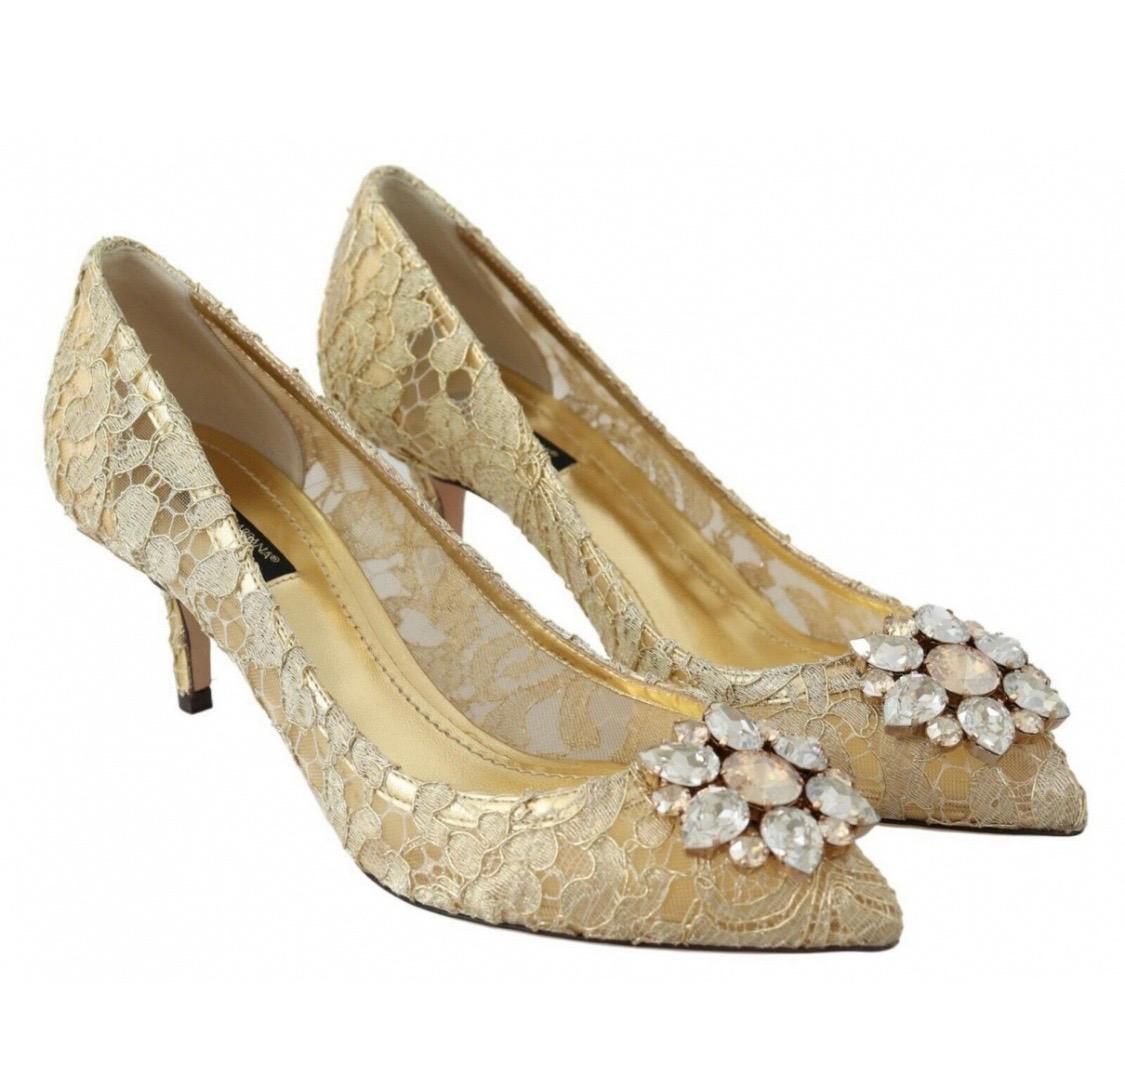 Brown Dolce & Gabbana gold lace cloth shoes heels pumps 